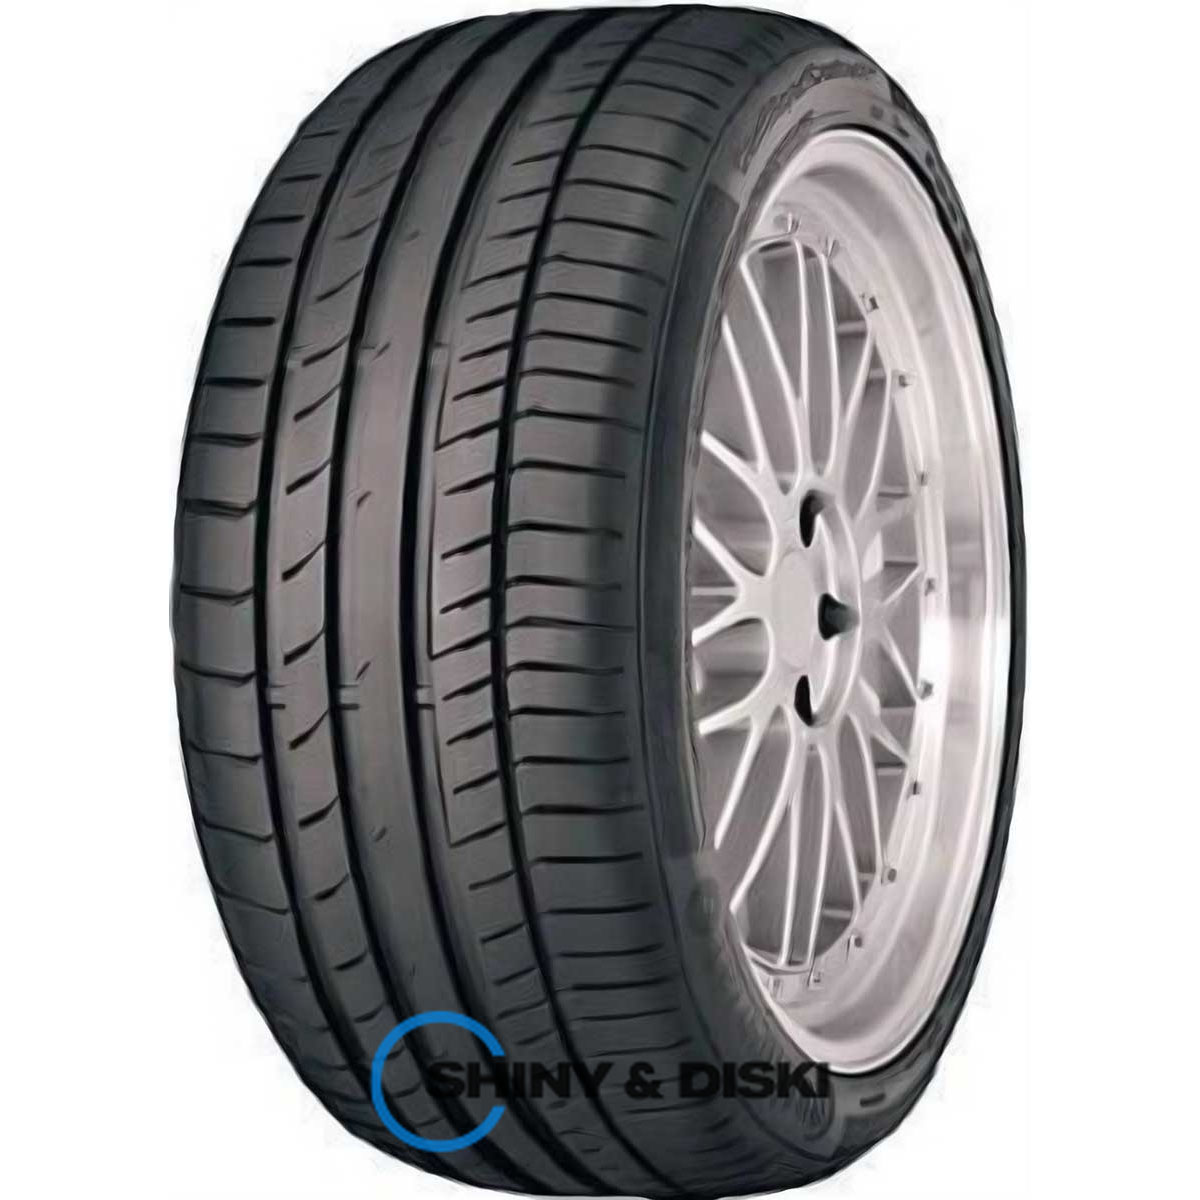 continental sportcontact 5p 275/30 r21 98y xl